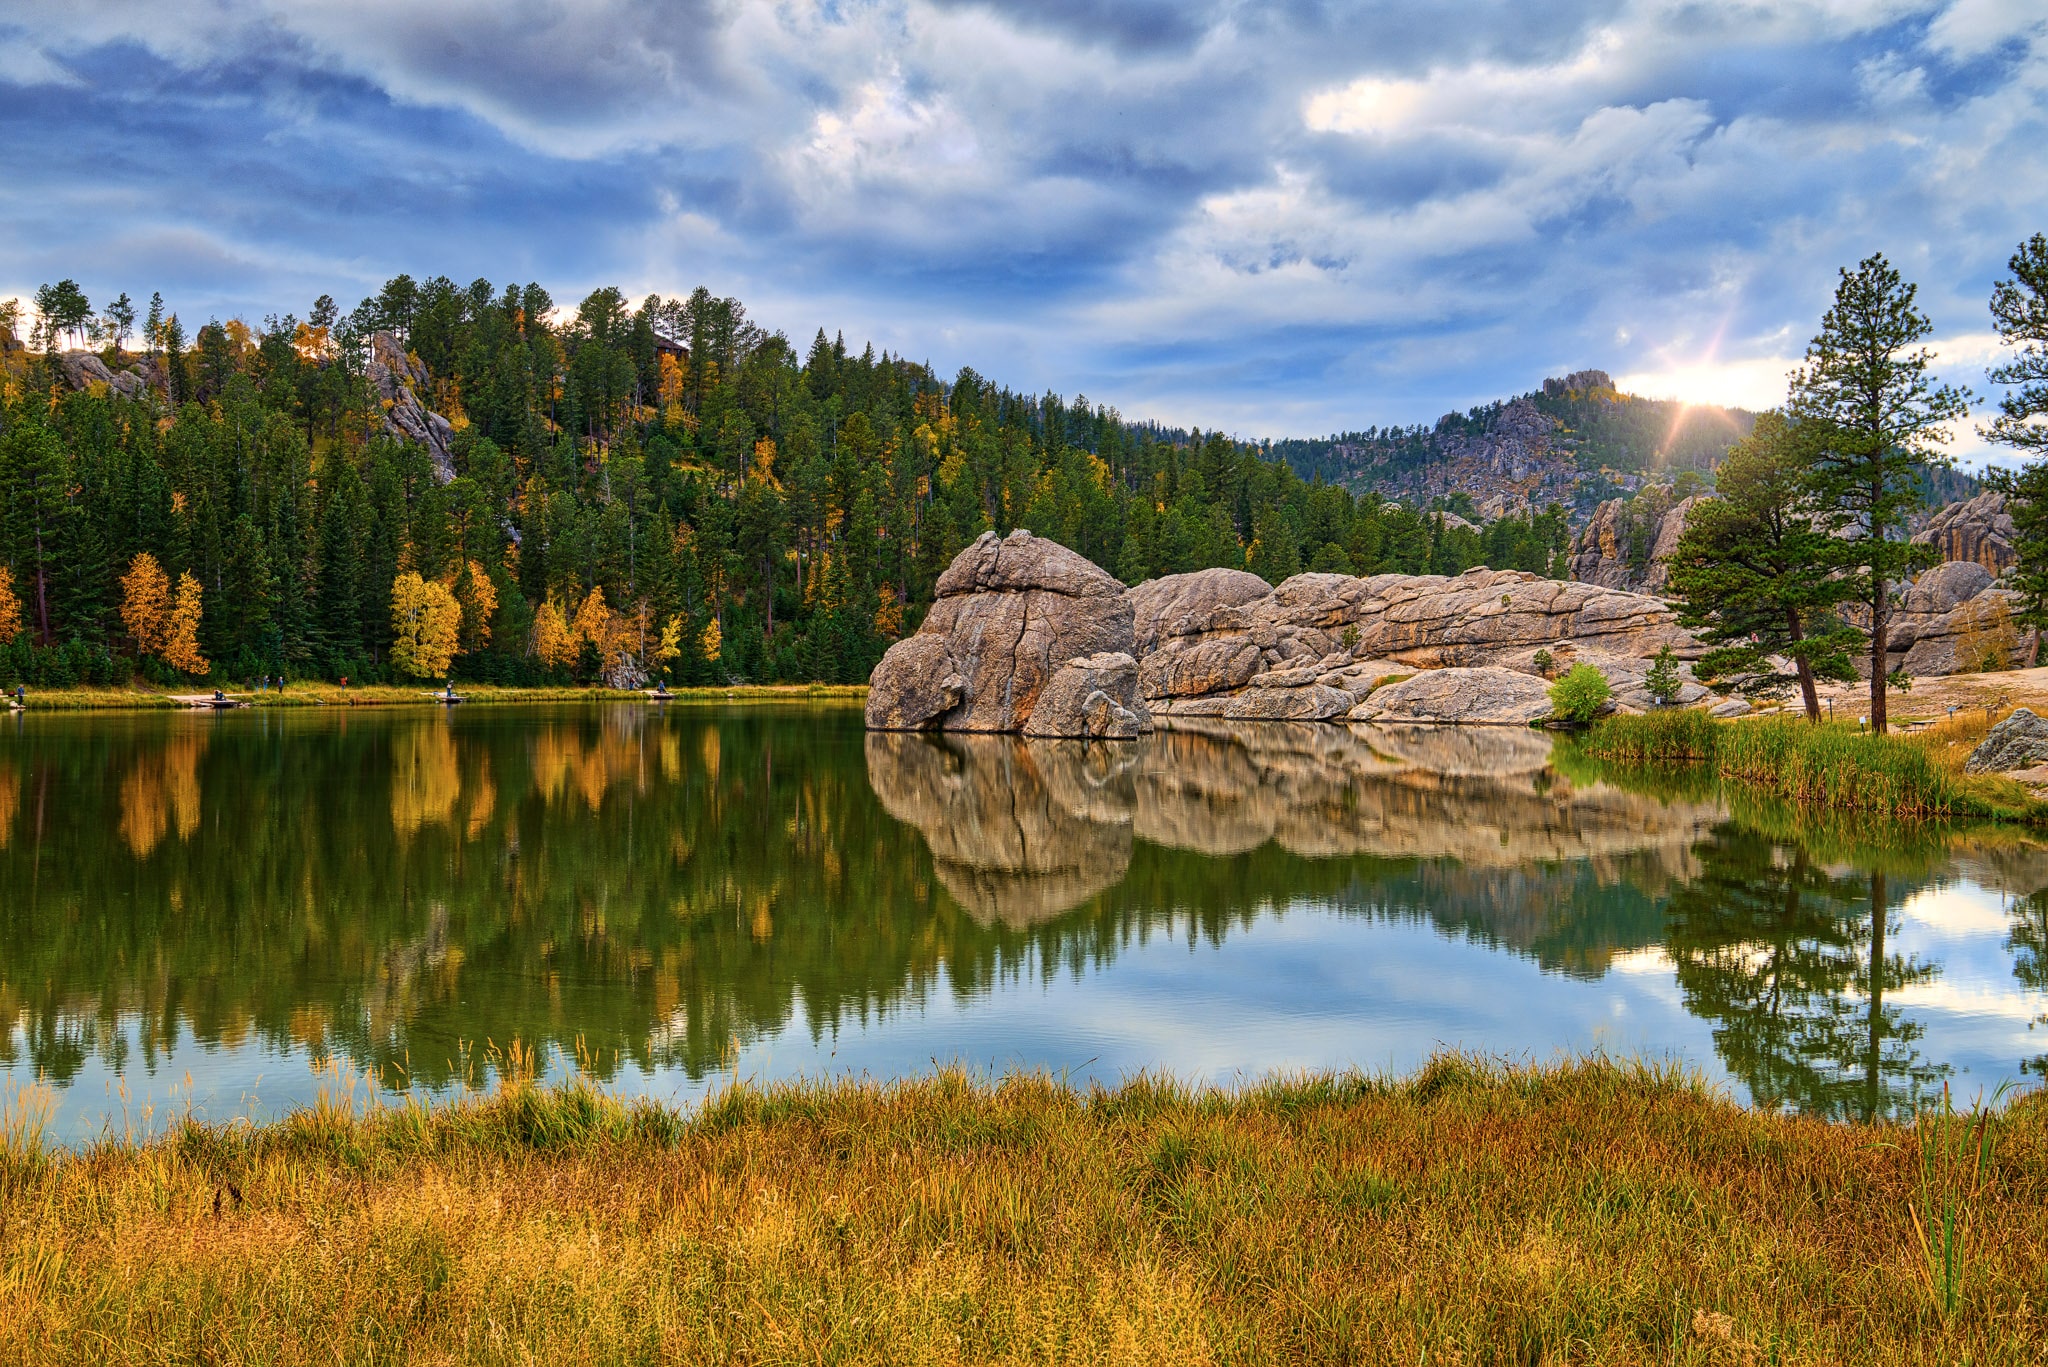 Clouds almost obscure the afternoon autumn sun as it highlights a granite rock formation and causes the multi-colored foliage to reflect in the still waters of Sylvan Lake in Custer State Park in South Dakota.